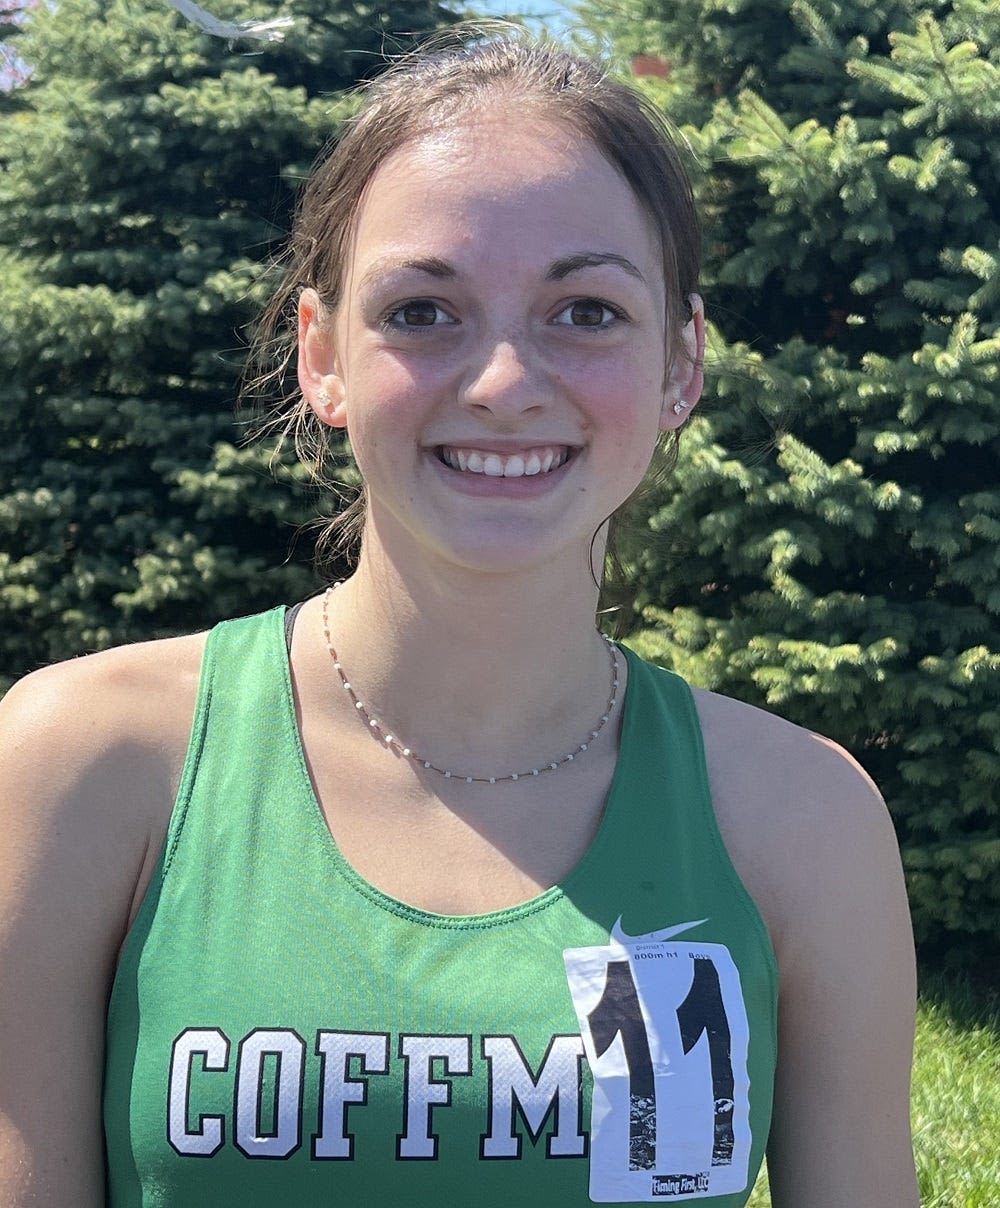 'Something special': Kylie Feeney breaks Abby Steiner's 400 record at Dublin Coffman